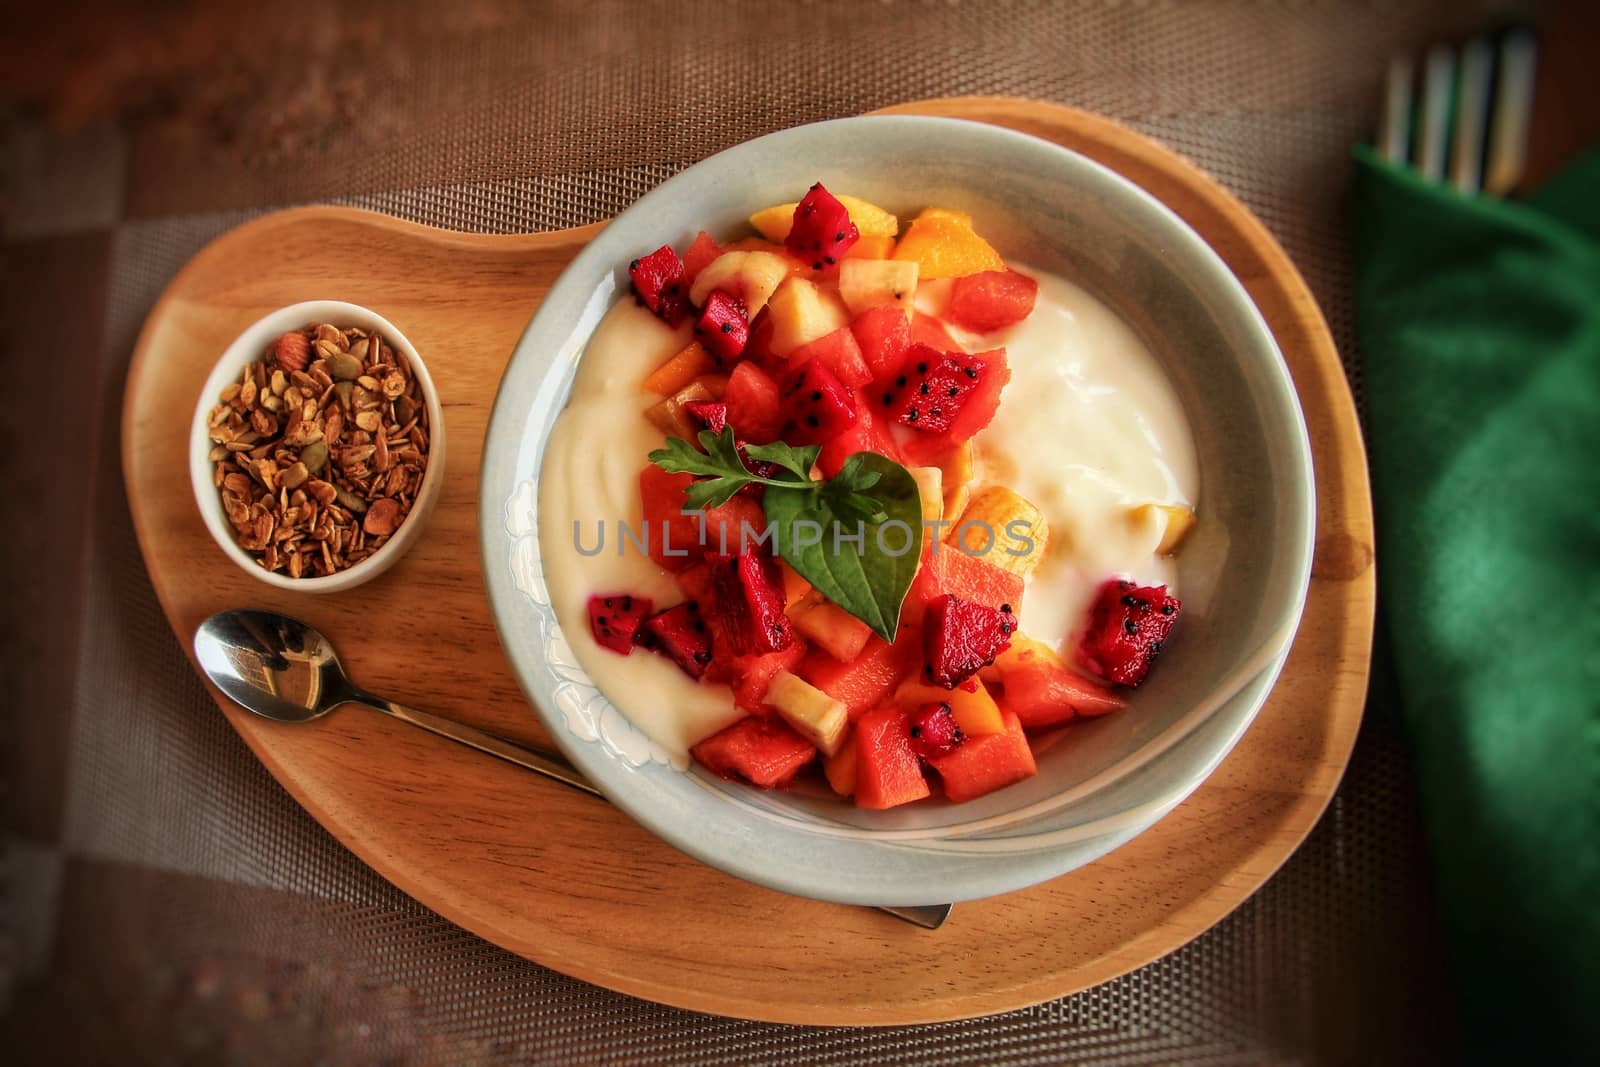 Healthy smoothie bowl for breakfast by Sonnet15